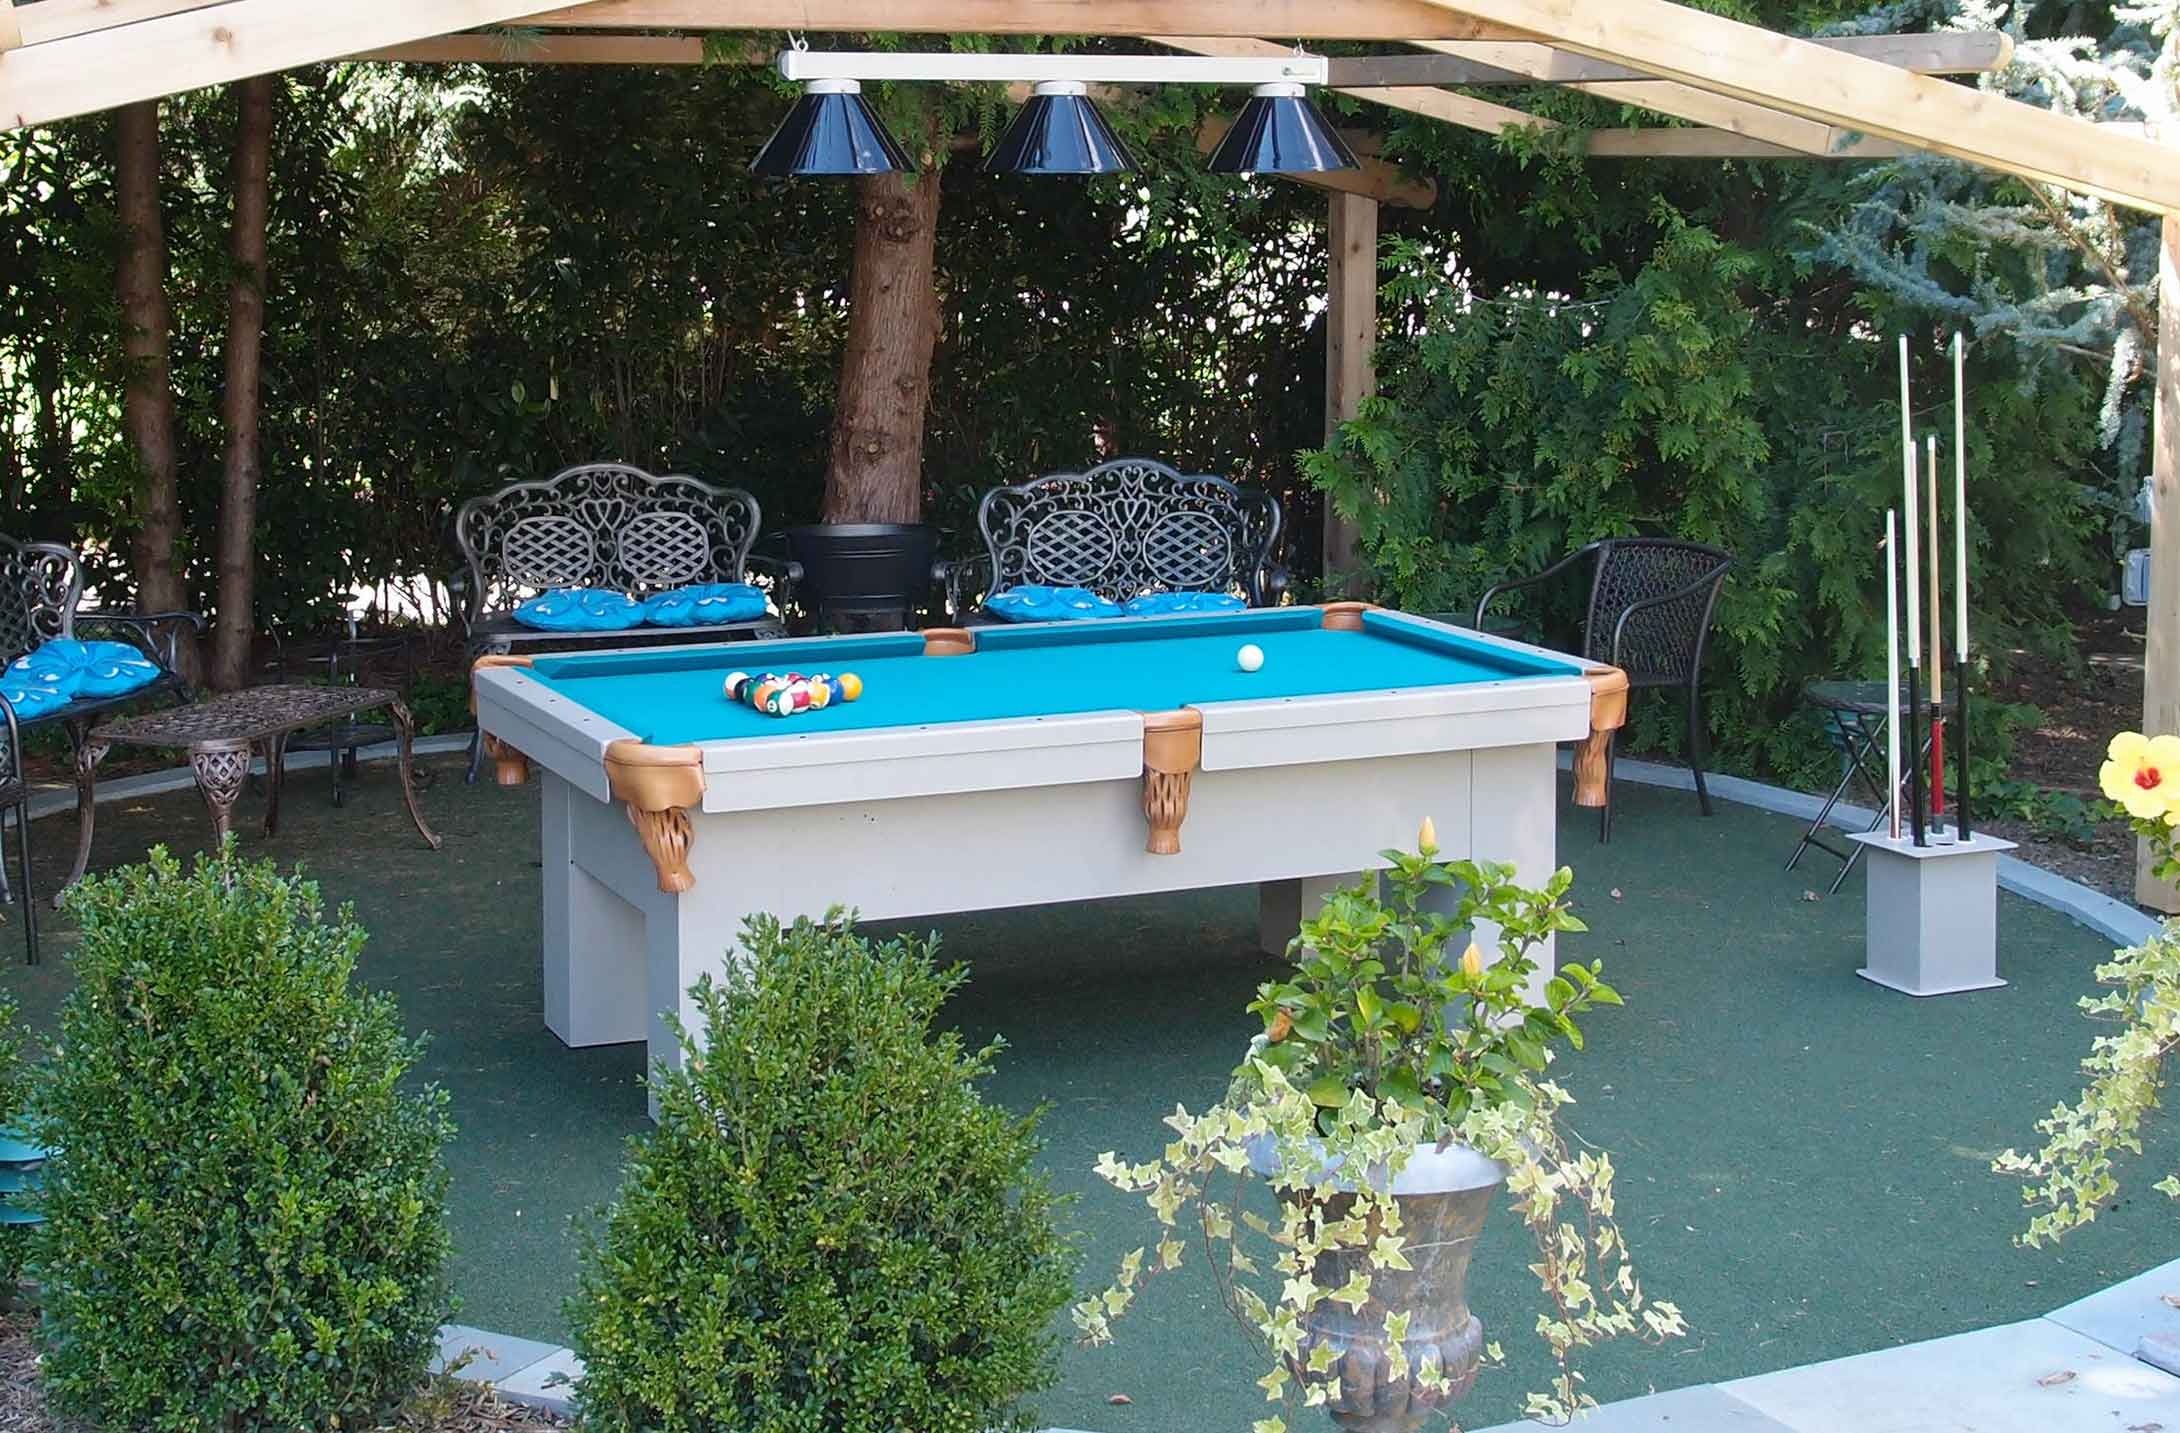 Orion custom pool table as the focal point of client's outdoor living space